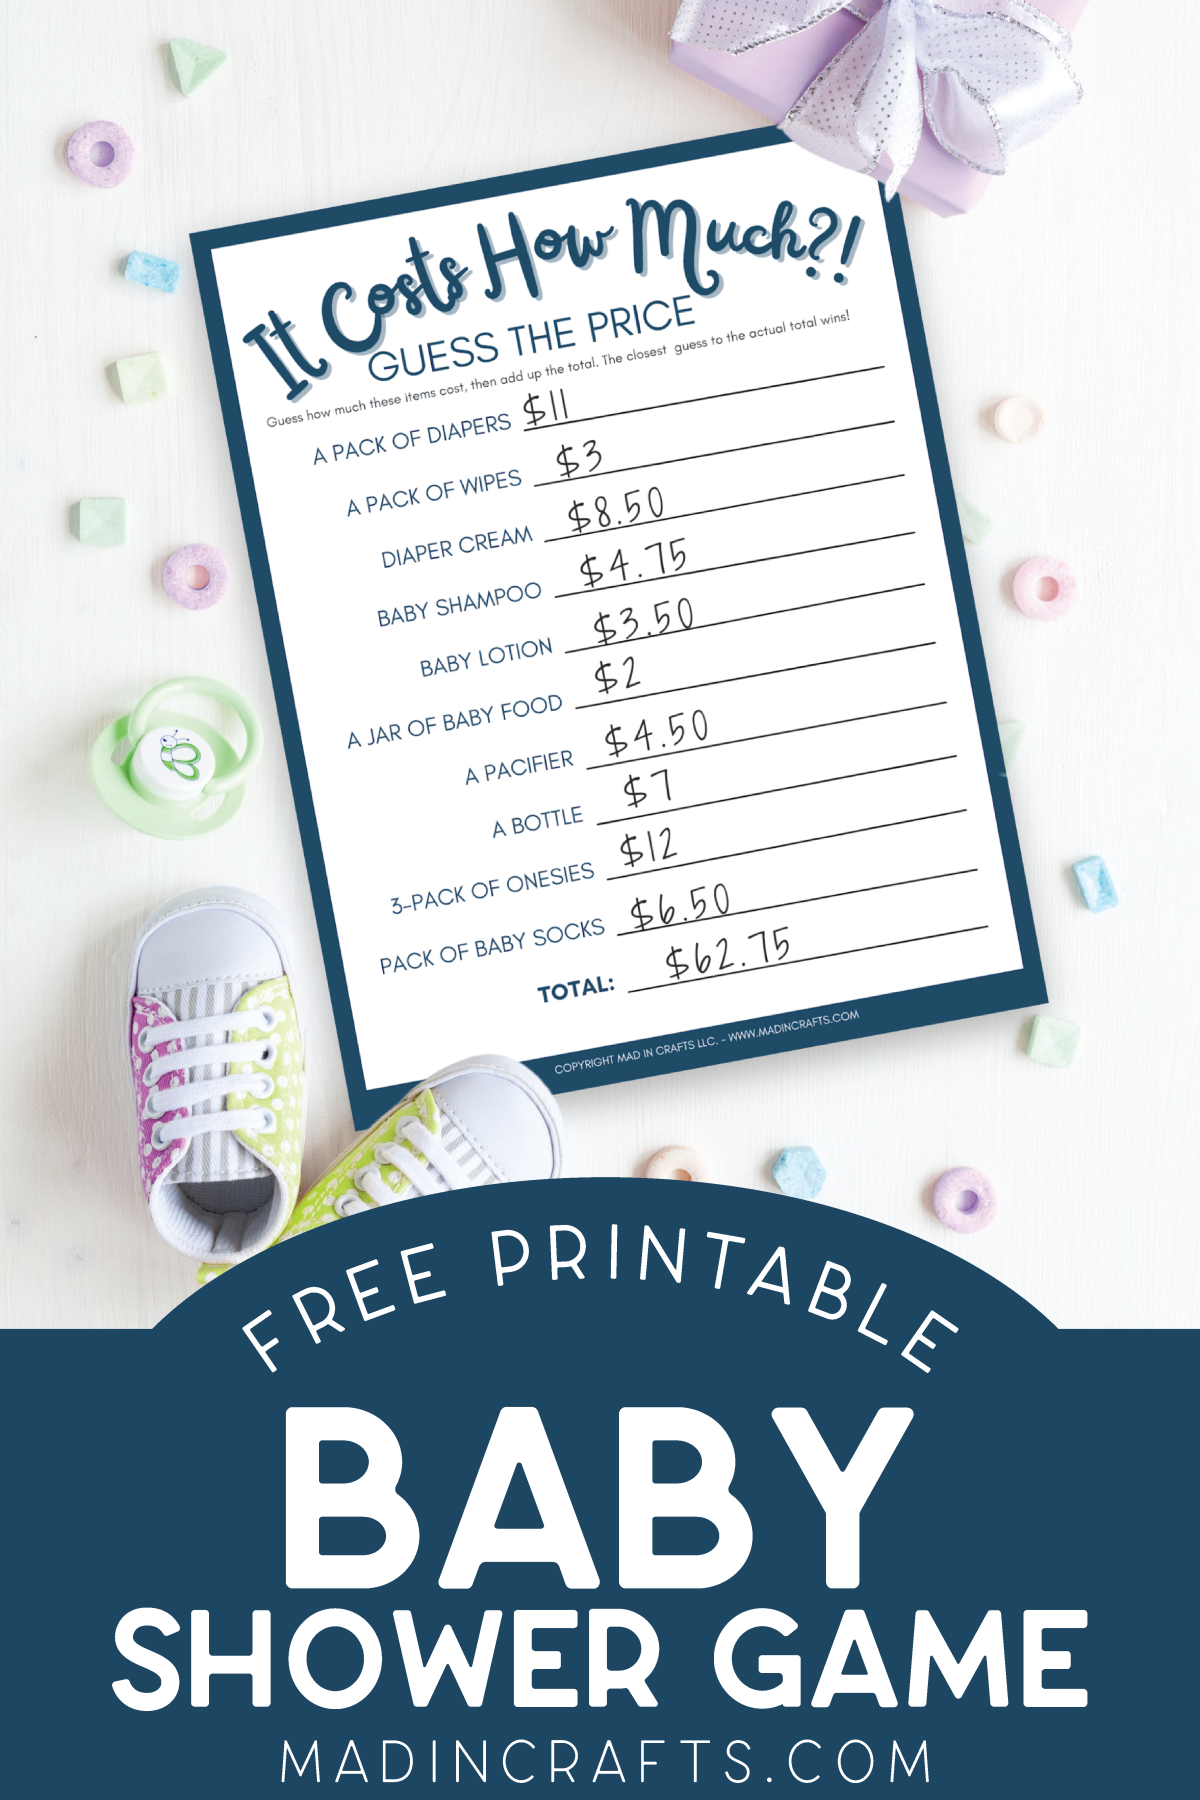 Filled out printable baby shower guessing game near baby shower decorations